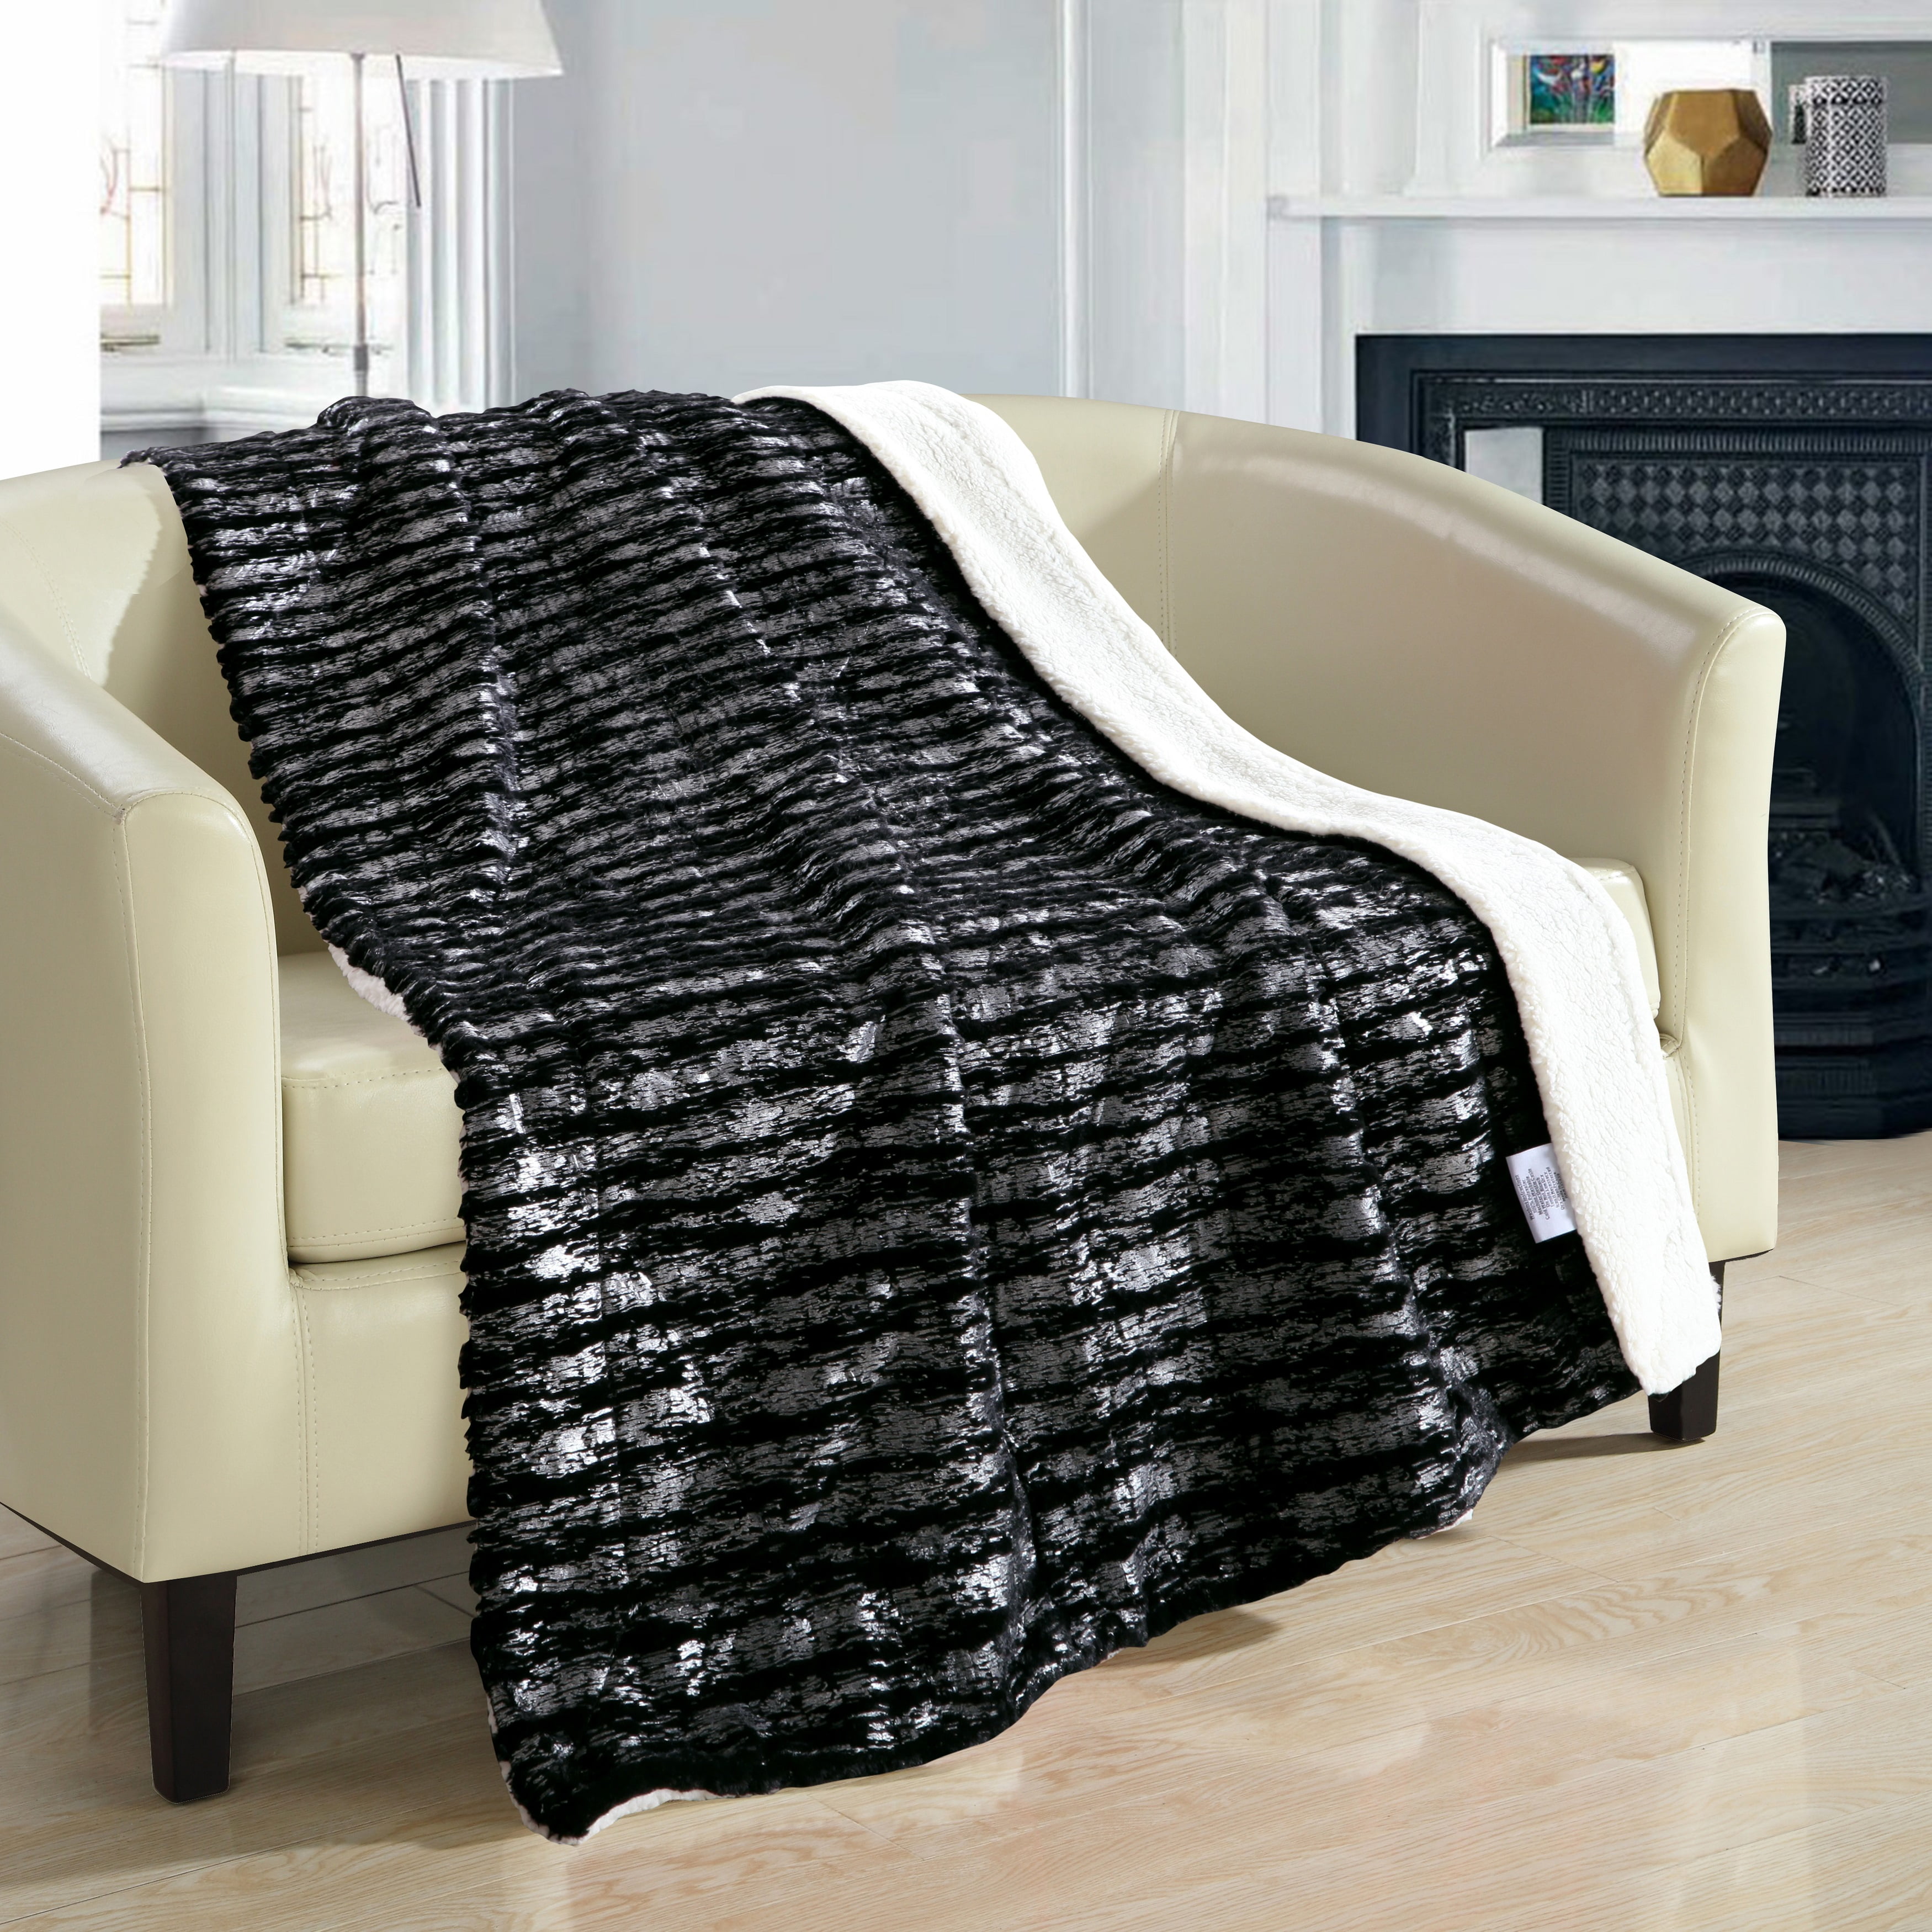 Jeffrey Banks Plaid Throw with Fringe  Blanket Coverlet Baby 